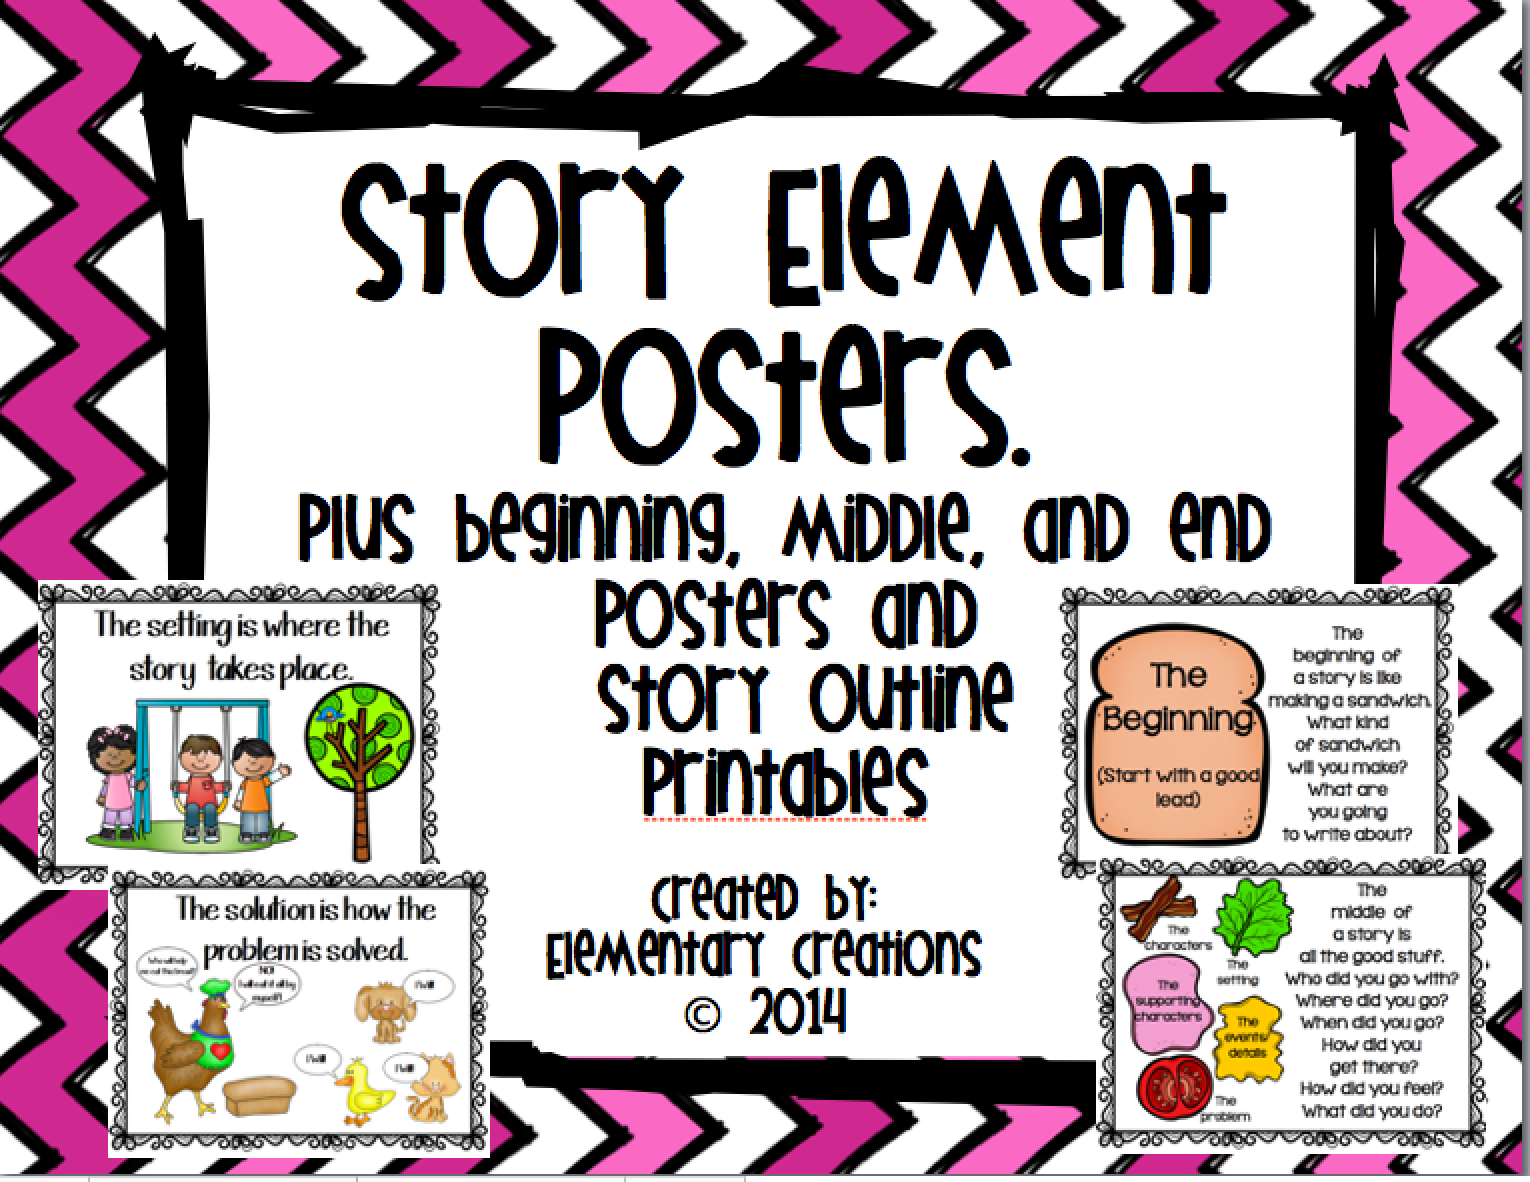 The story is set. Story poster. Custom stories плакат. Setting of the story. Elementary poster.